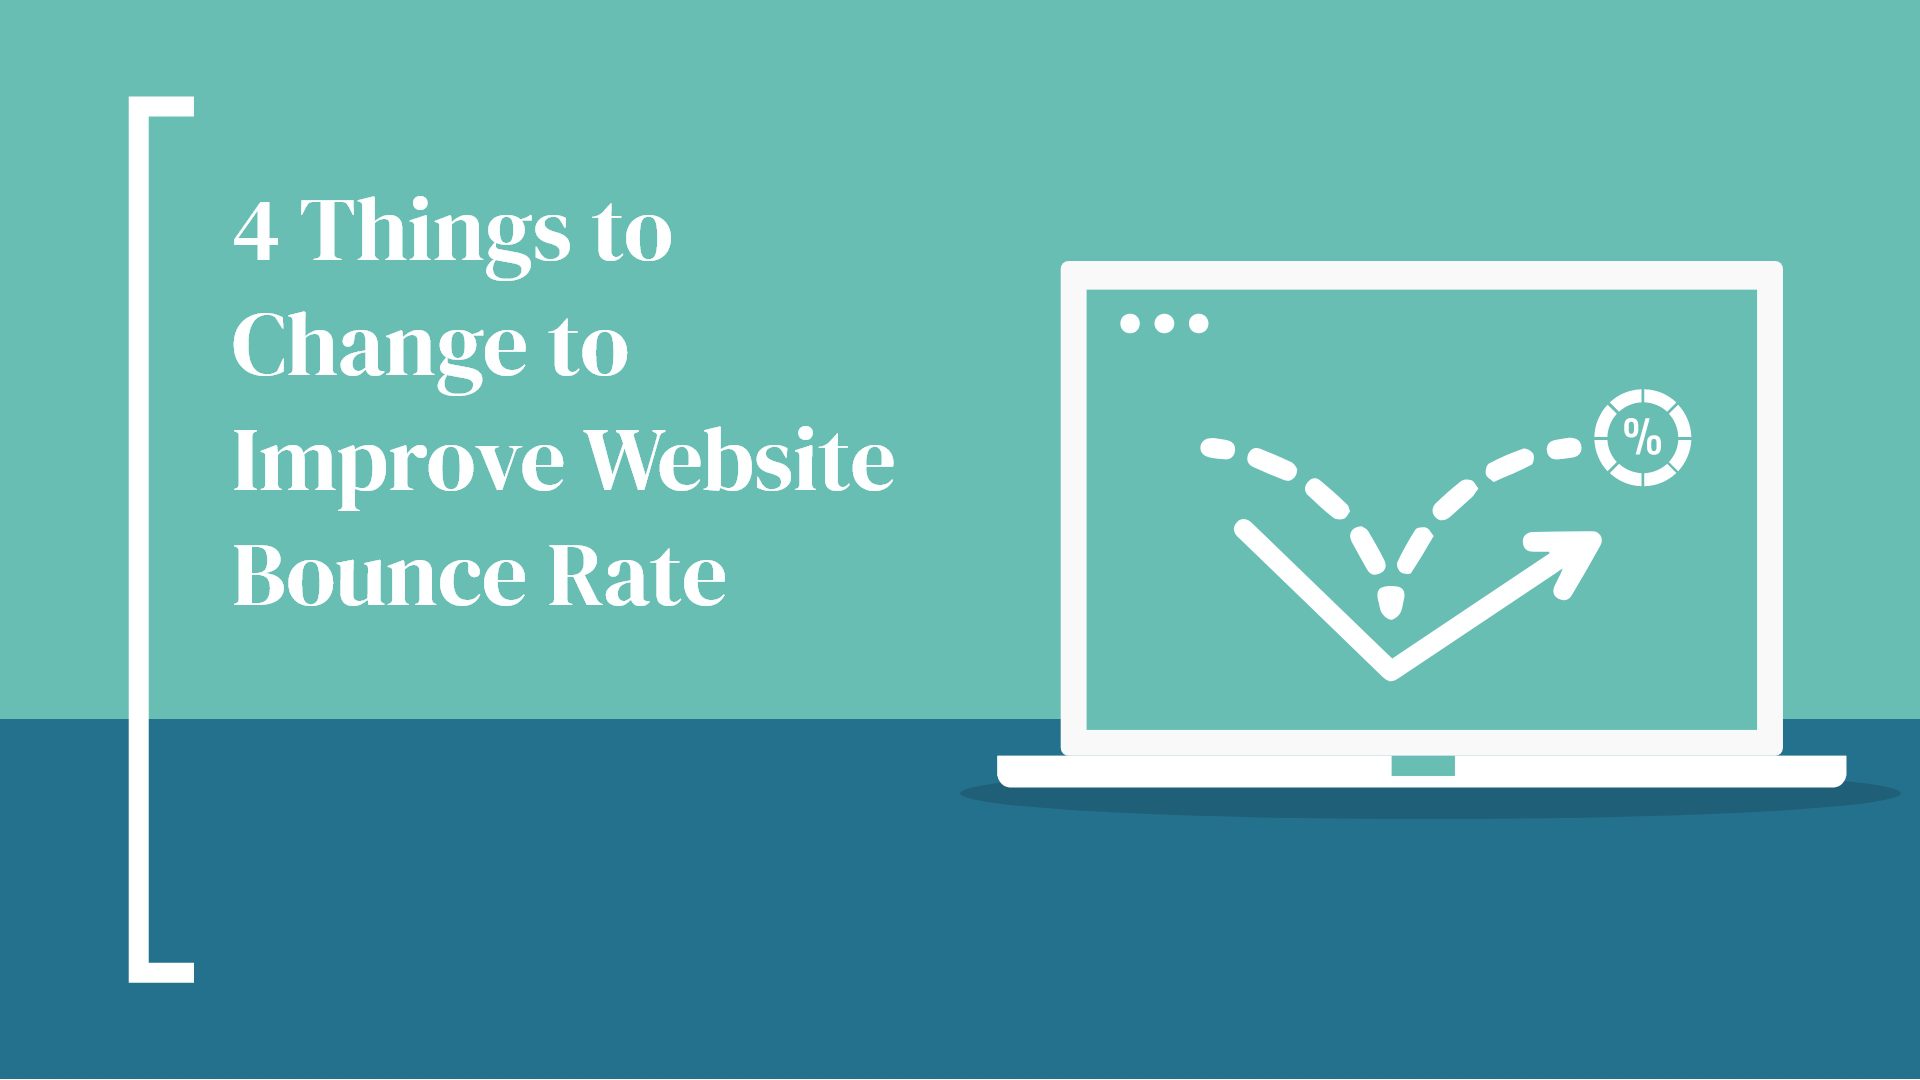 4 Things to Change to Improve Website Bounce Rate